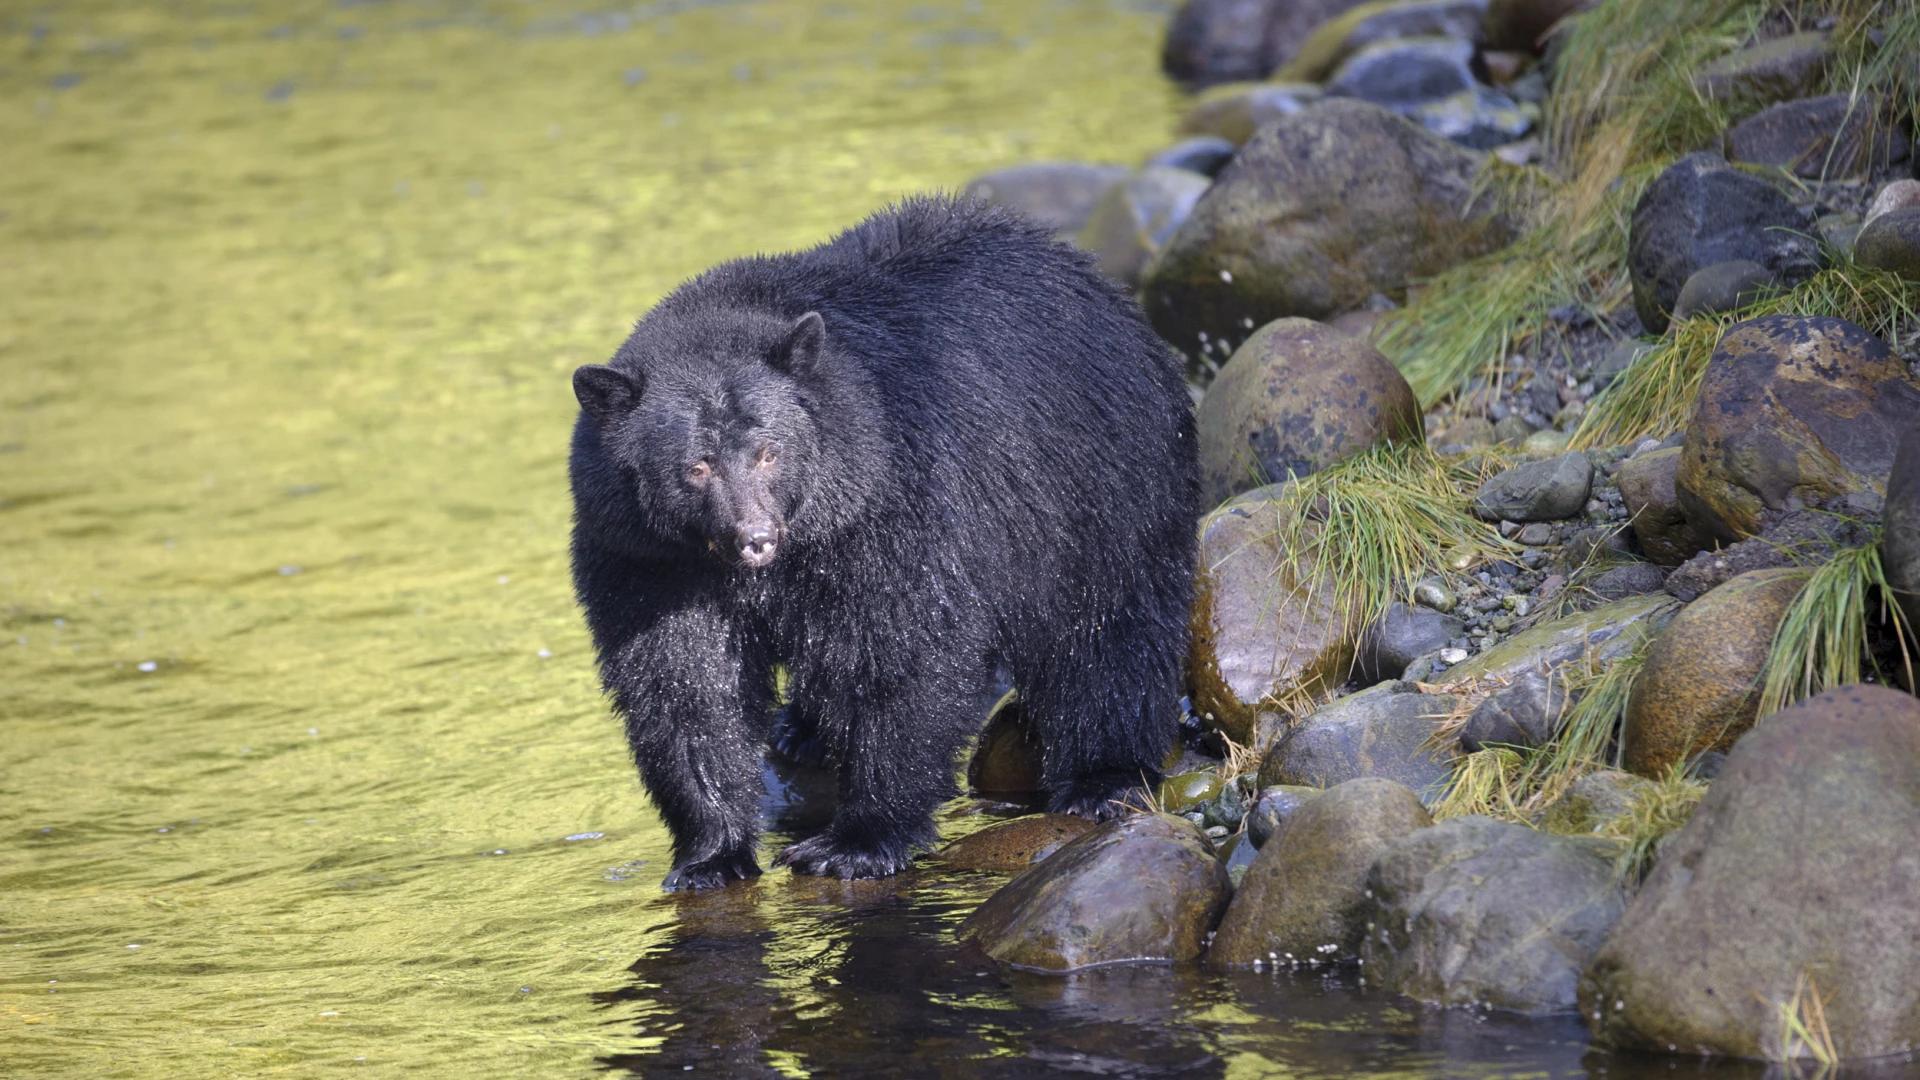 Anti-hunters put a stop to hunting in area of Great Bear Rainforest after buying out the hunting rights